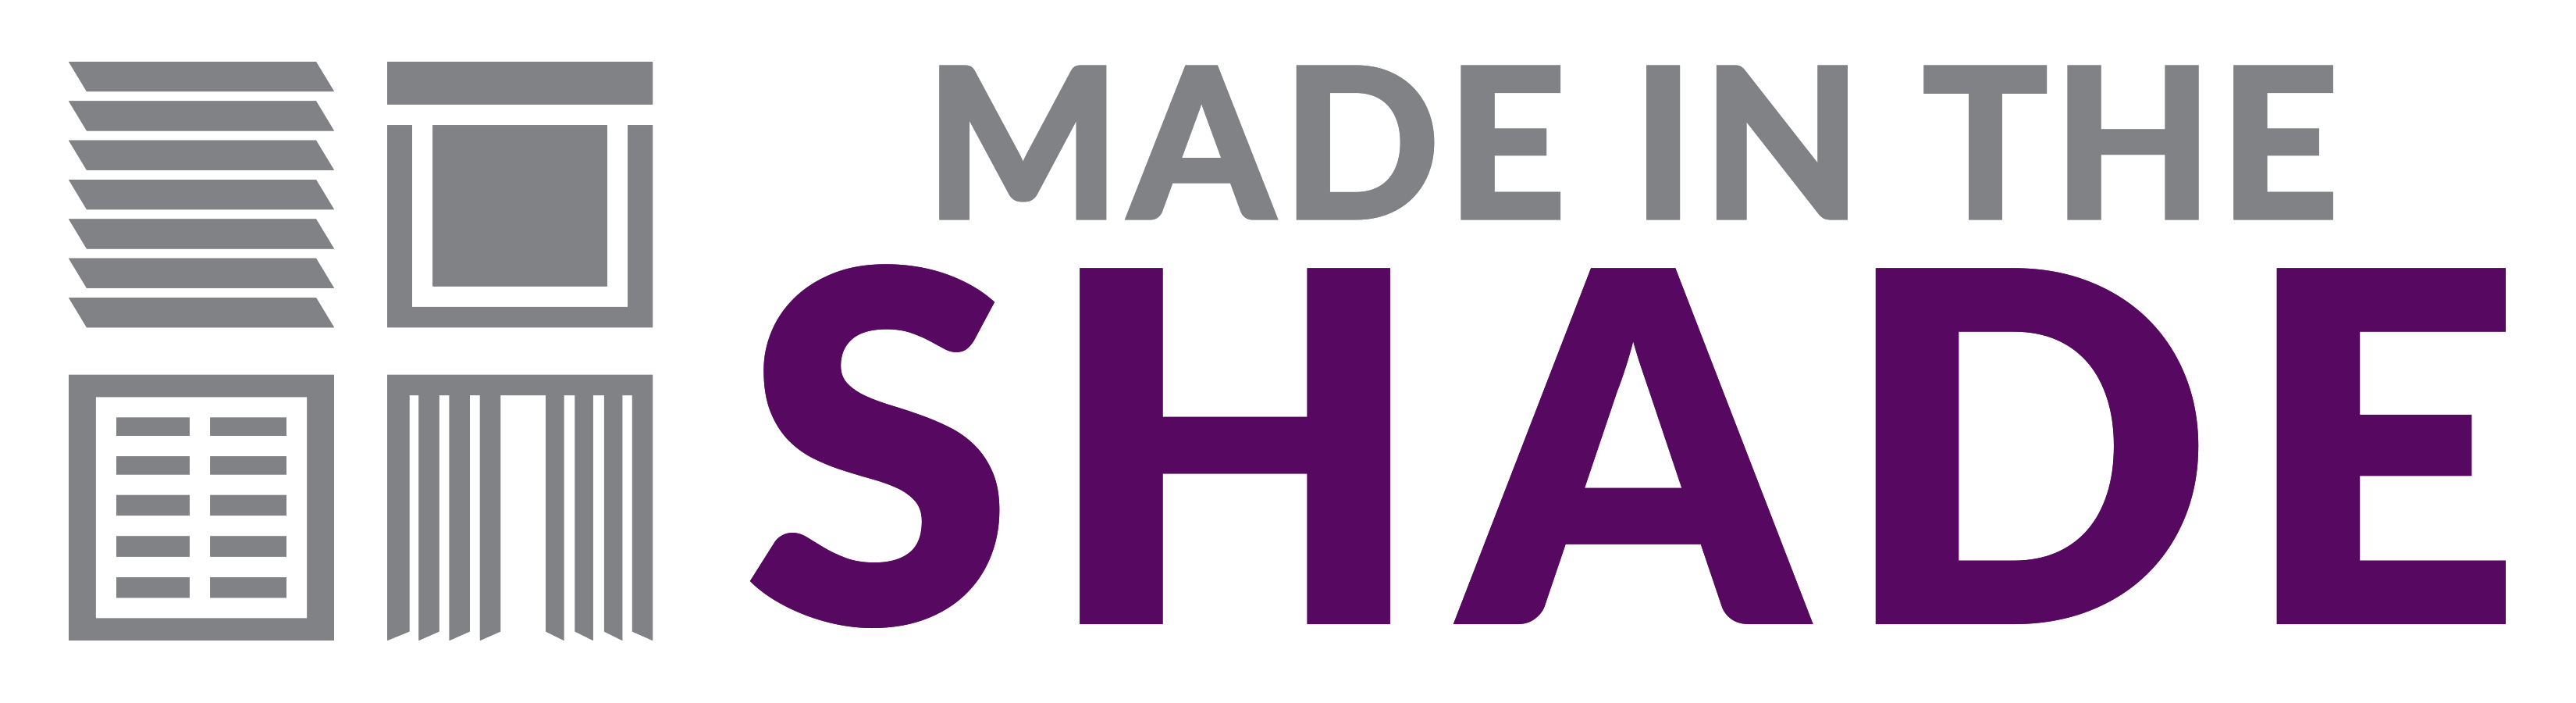 Made in the Shade Blinds Franchise